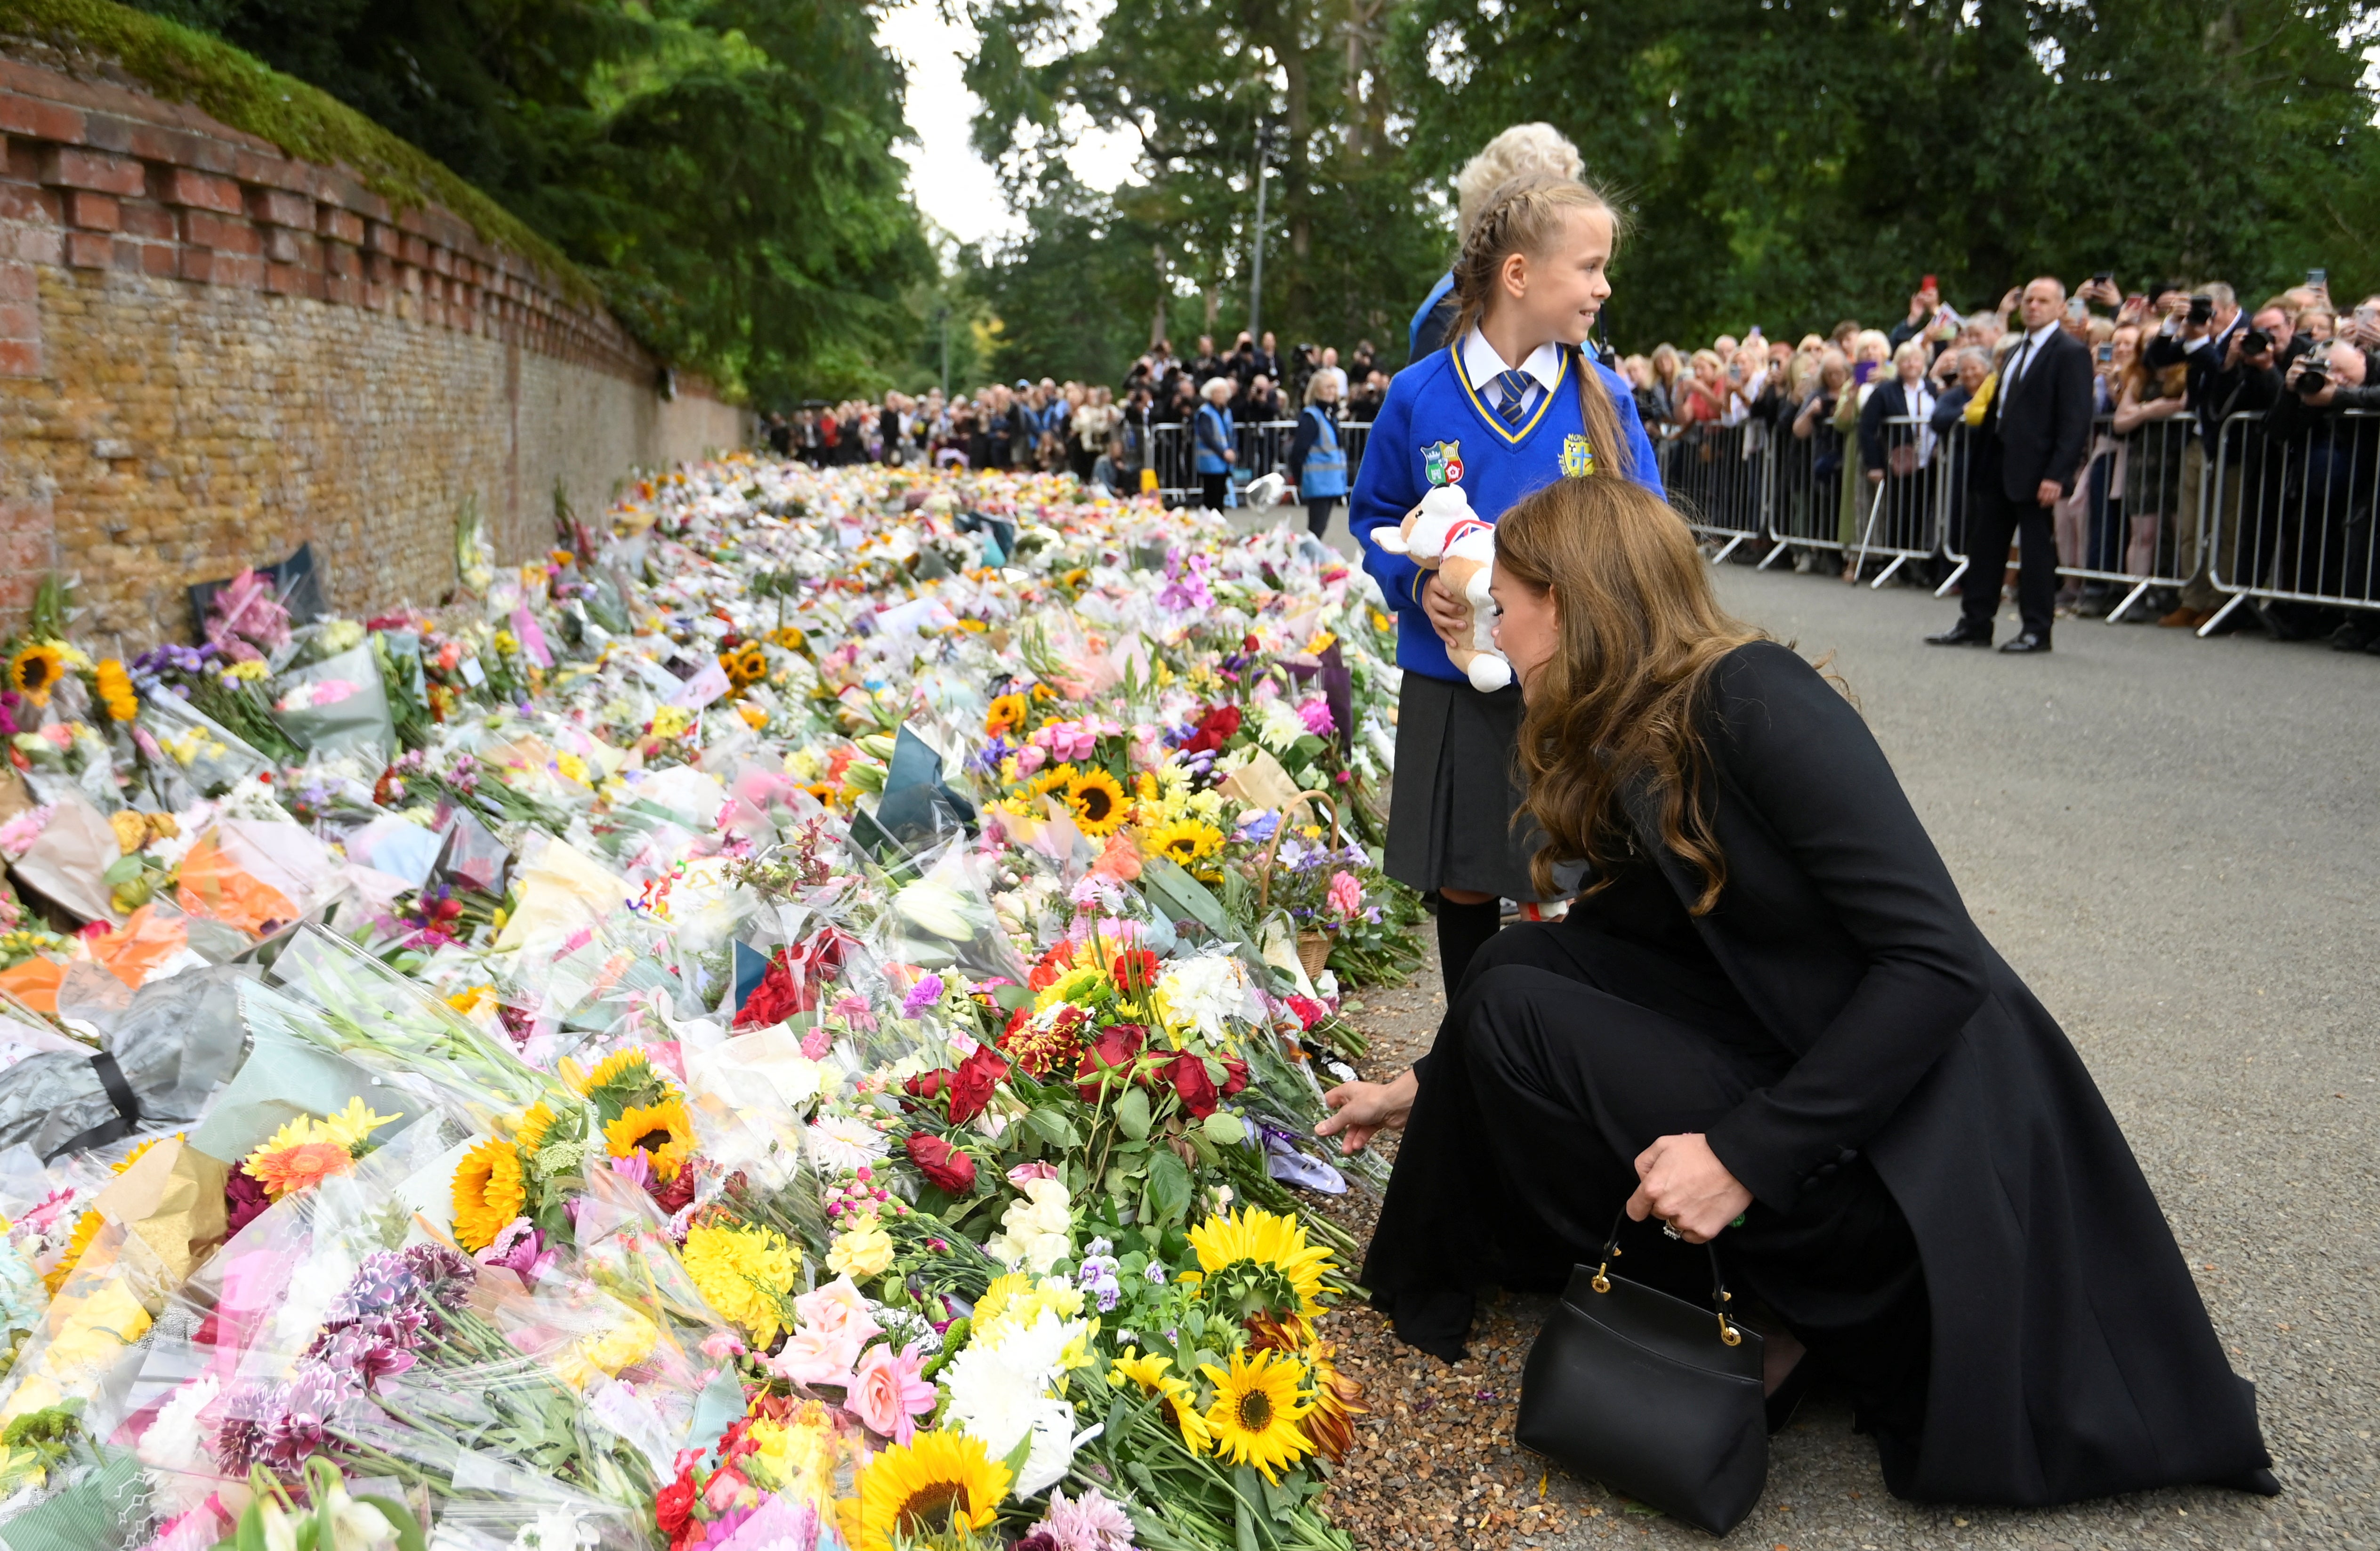 The Princess of Wales views the floral tributes (Toby Melville/PA)